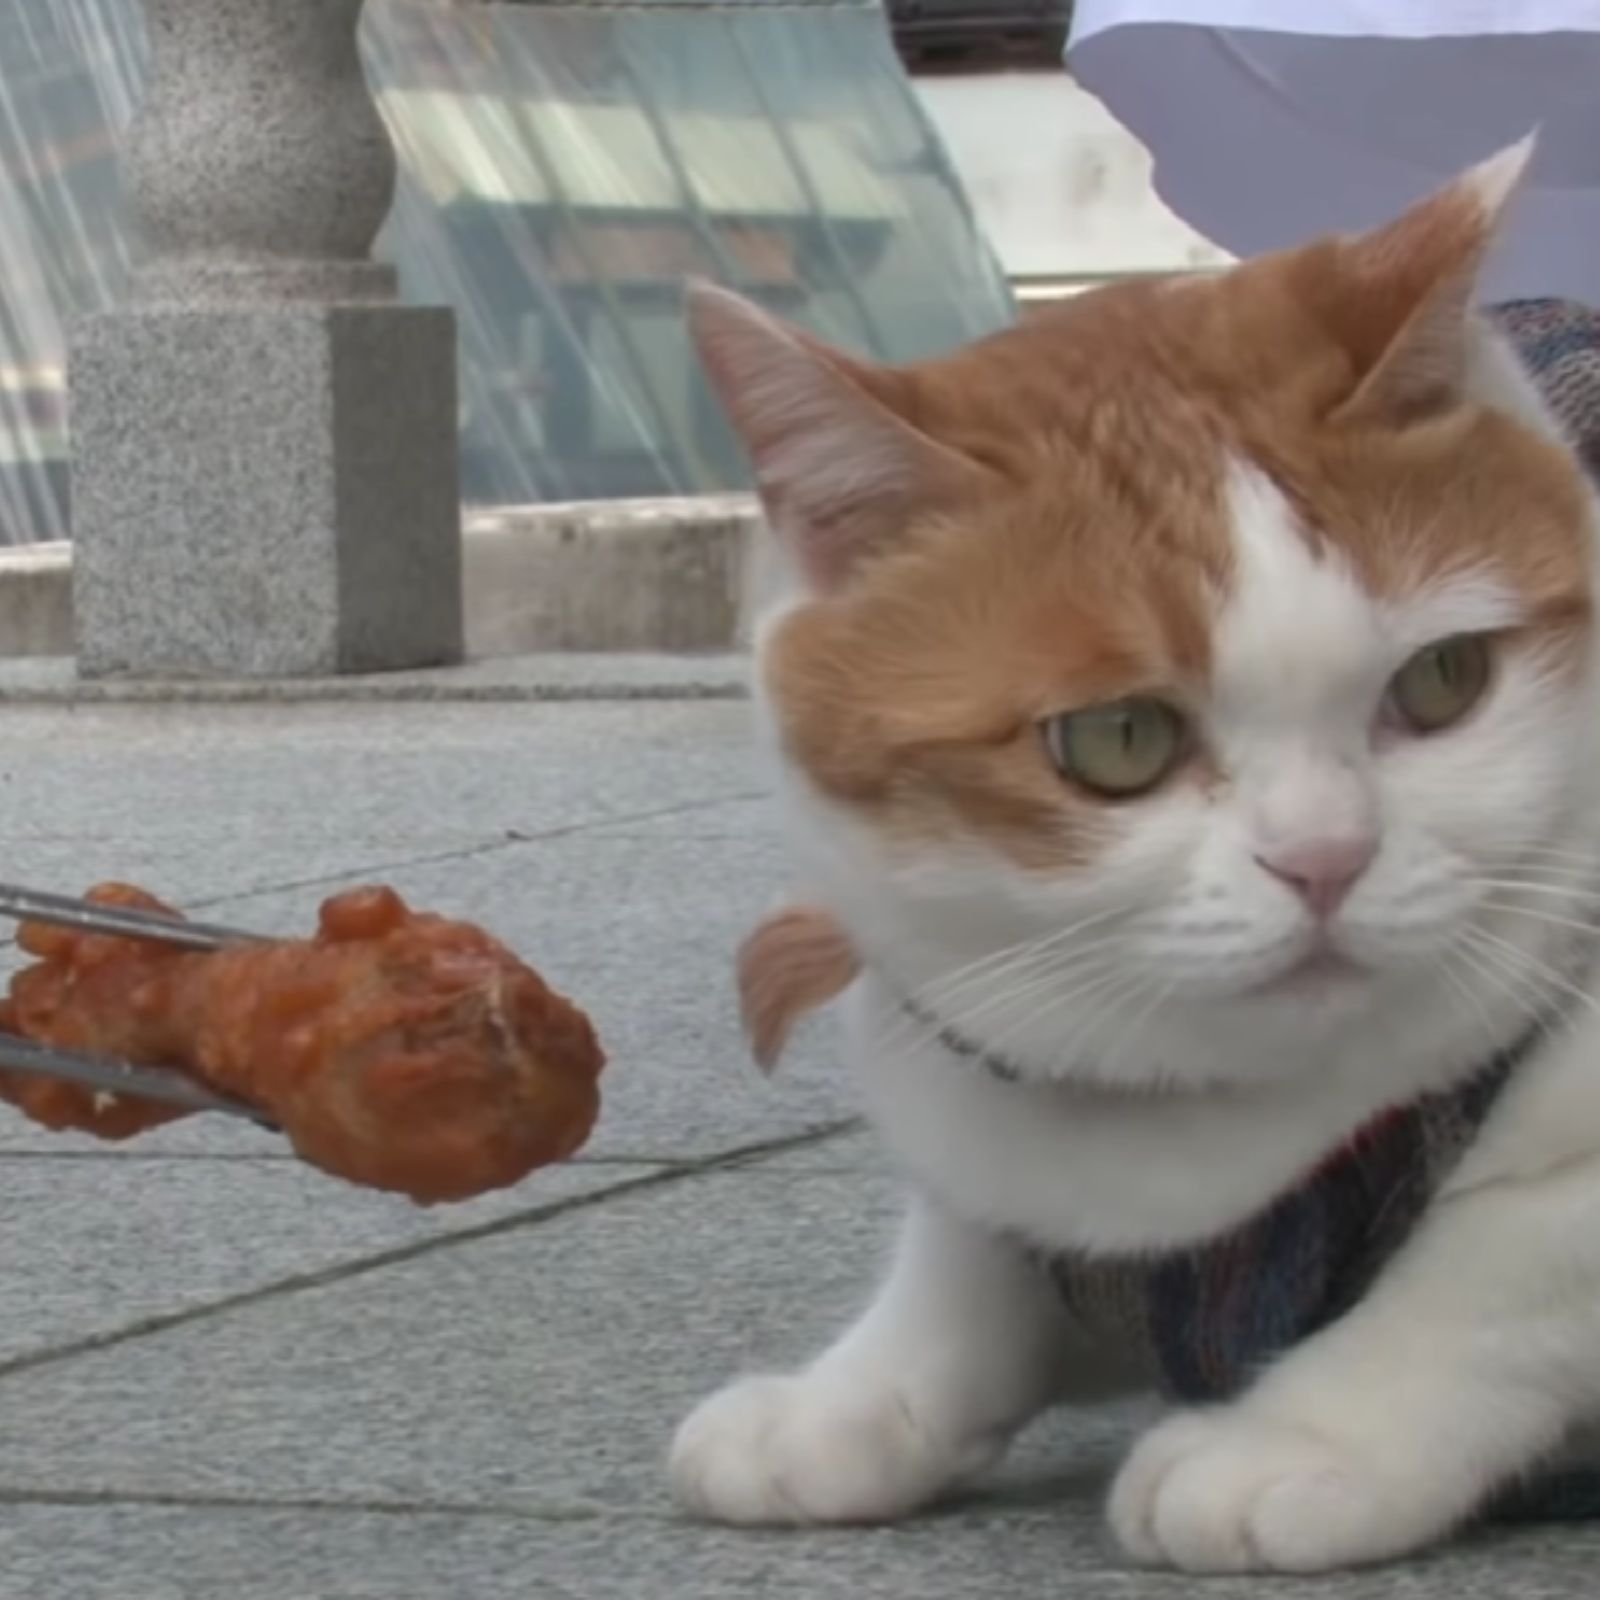 cat looking away from meat